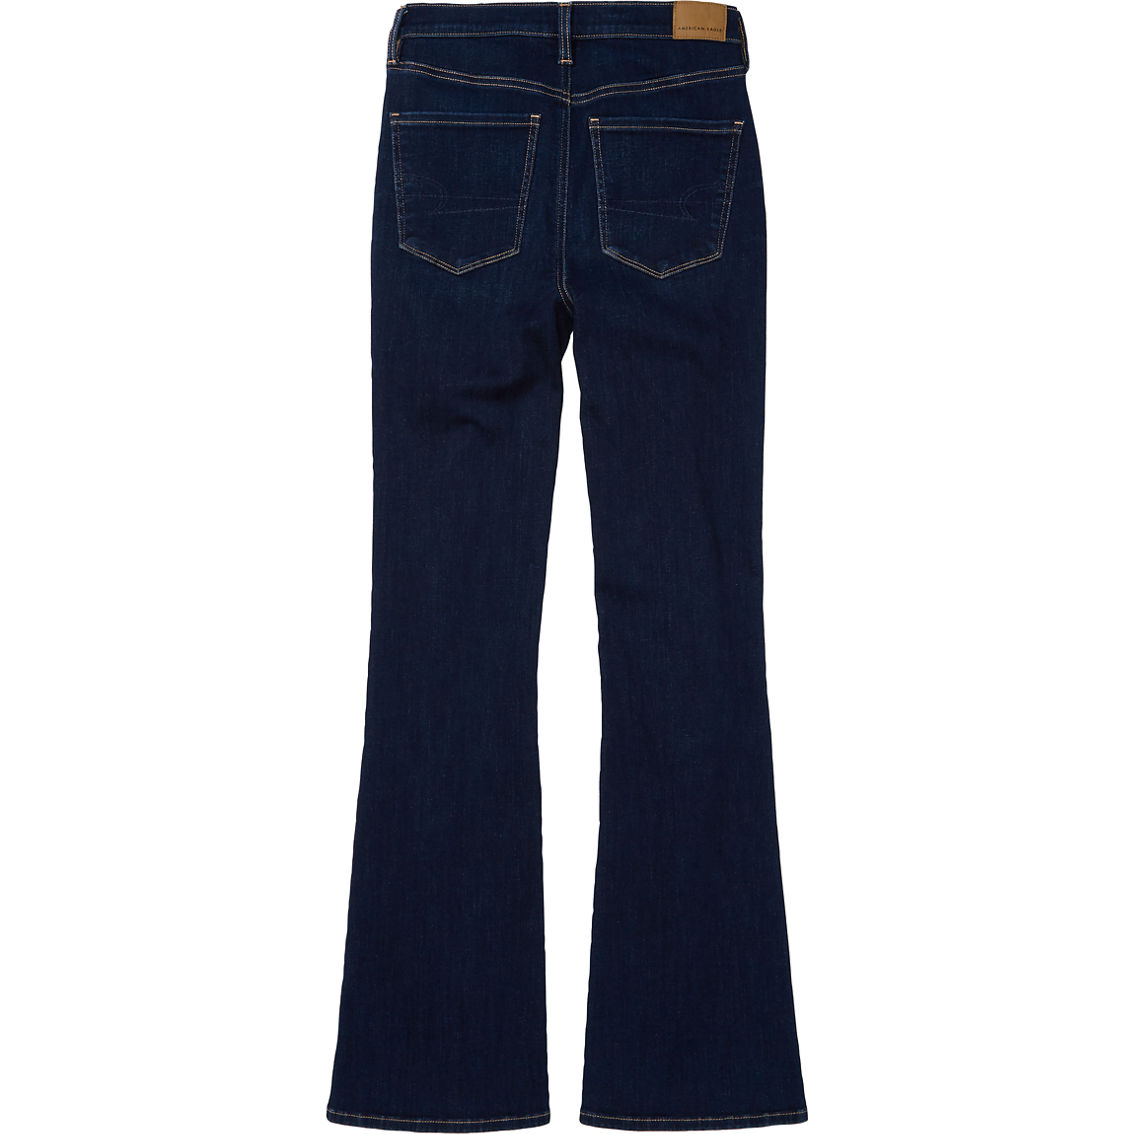 American Eagle Juniors Next Level Super High Waisted Flare Jeans - Image 5 of 5